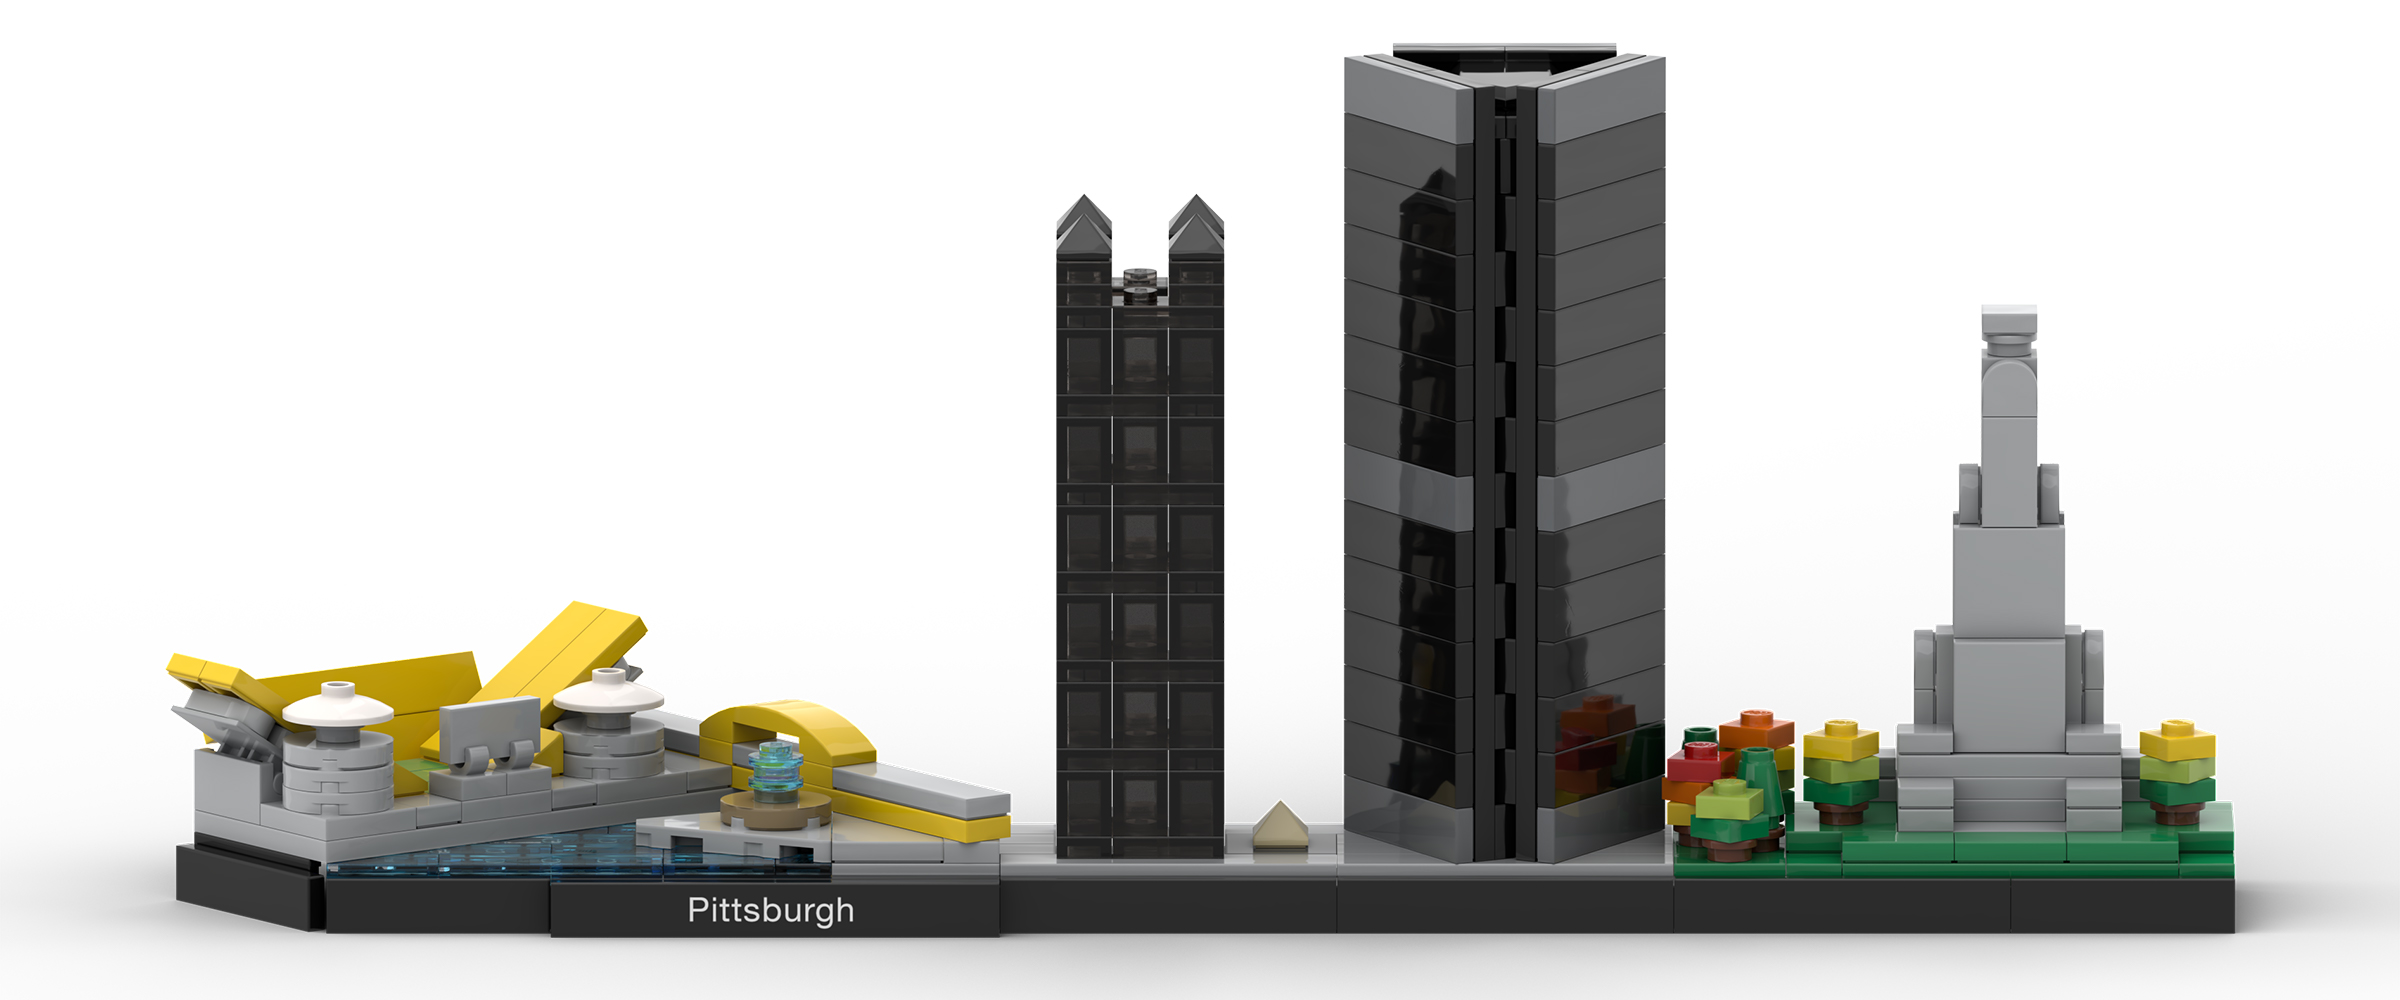 A Look At the LEGO Architecture Las Vegas (21038)